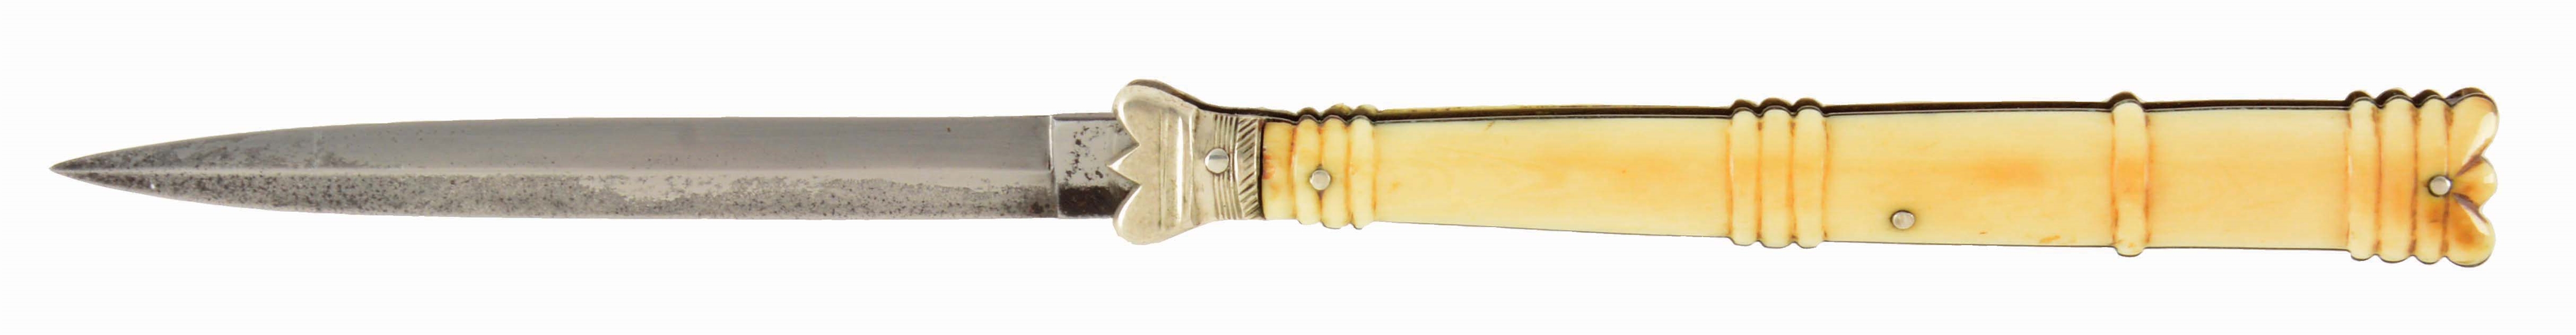 CHARLES CONGREVE SHEFFIELD FOLDING DIRK WITH IVORY GRIPS CIRCA 1865.